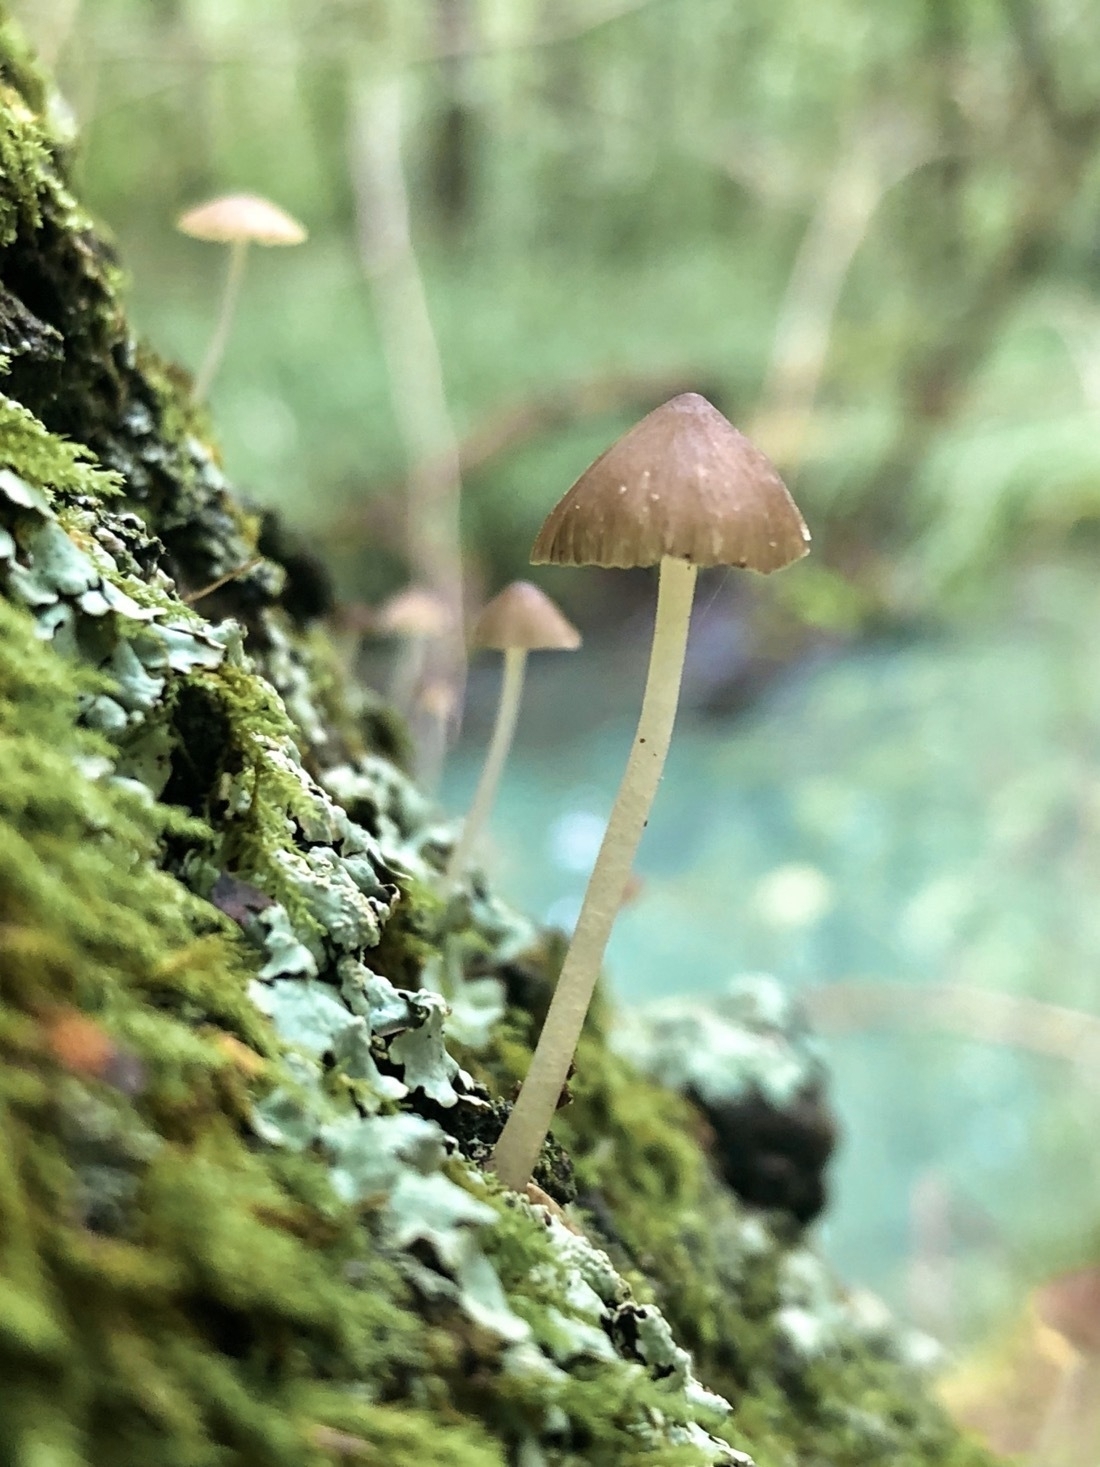 Cream colored mushrooms growing from the side of a moss covered surface